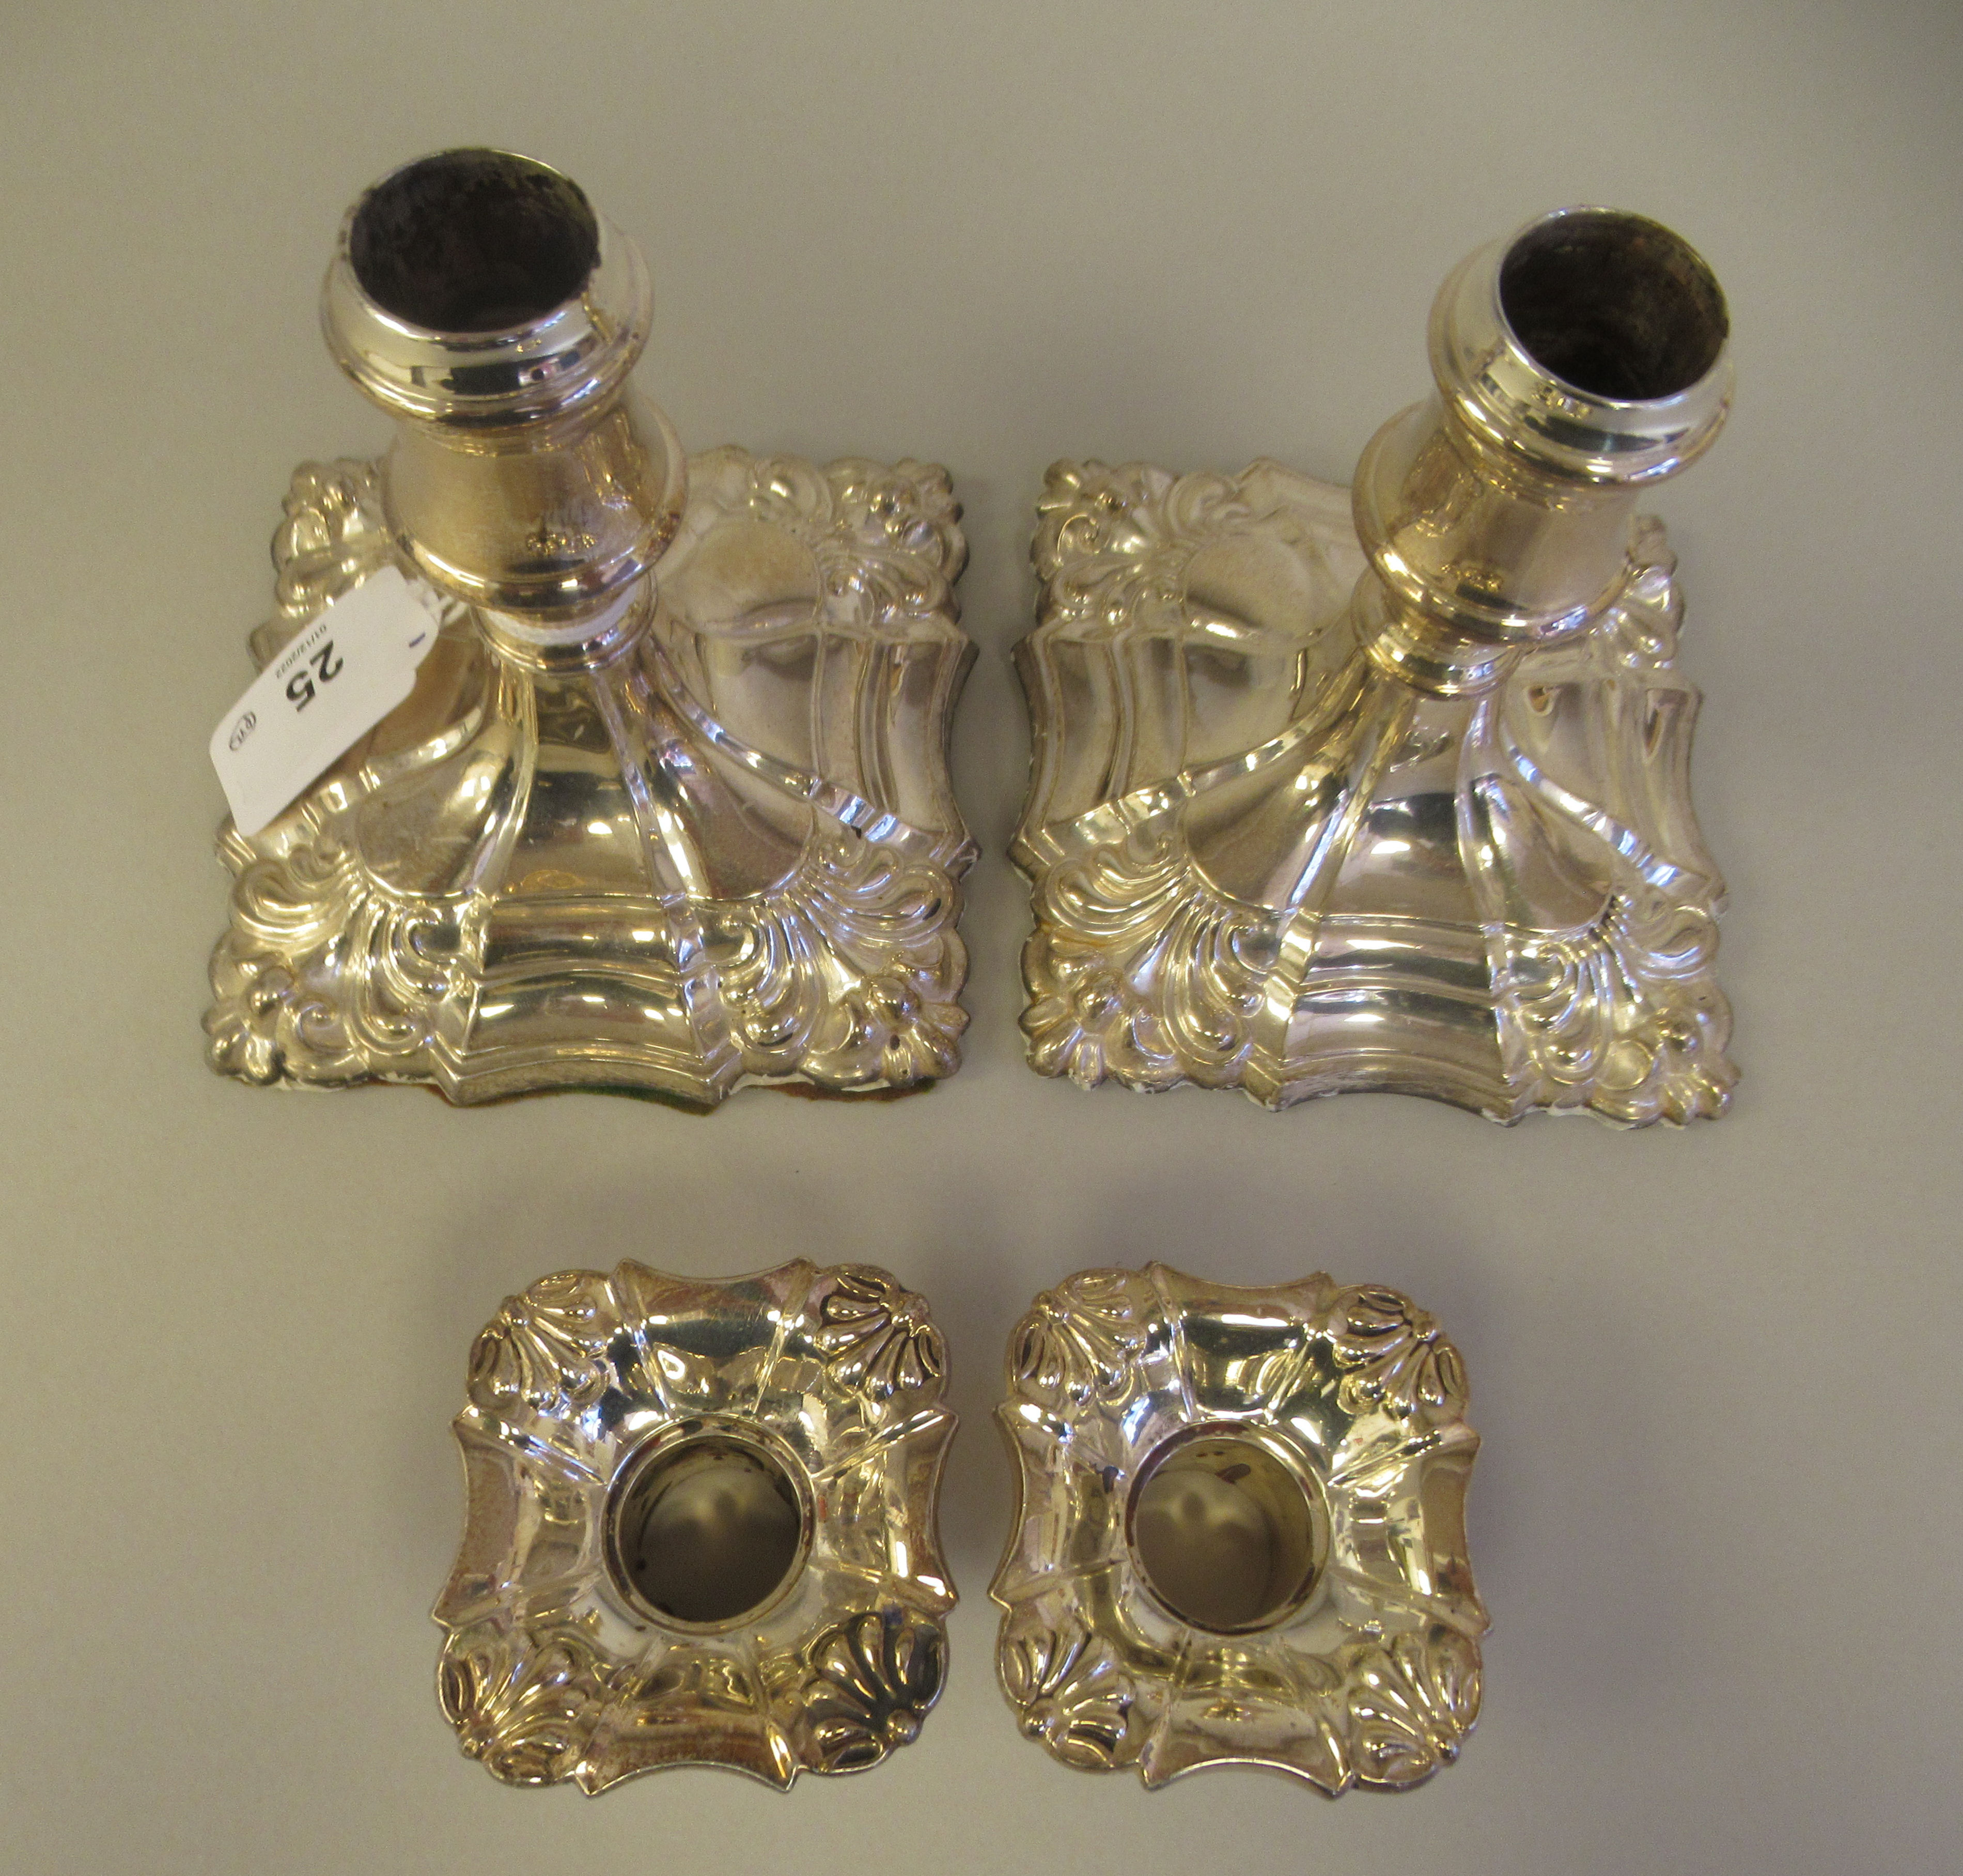 A pair of 18/19thC style loaded silver dwarf candlesticks, each with a detachable sconce and vase - Image 5 of 7